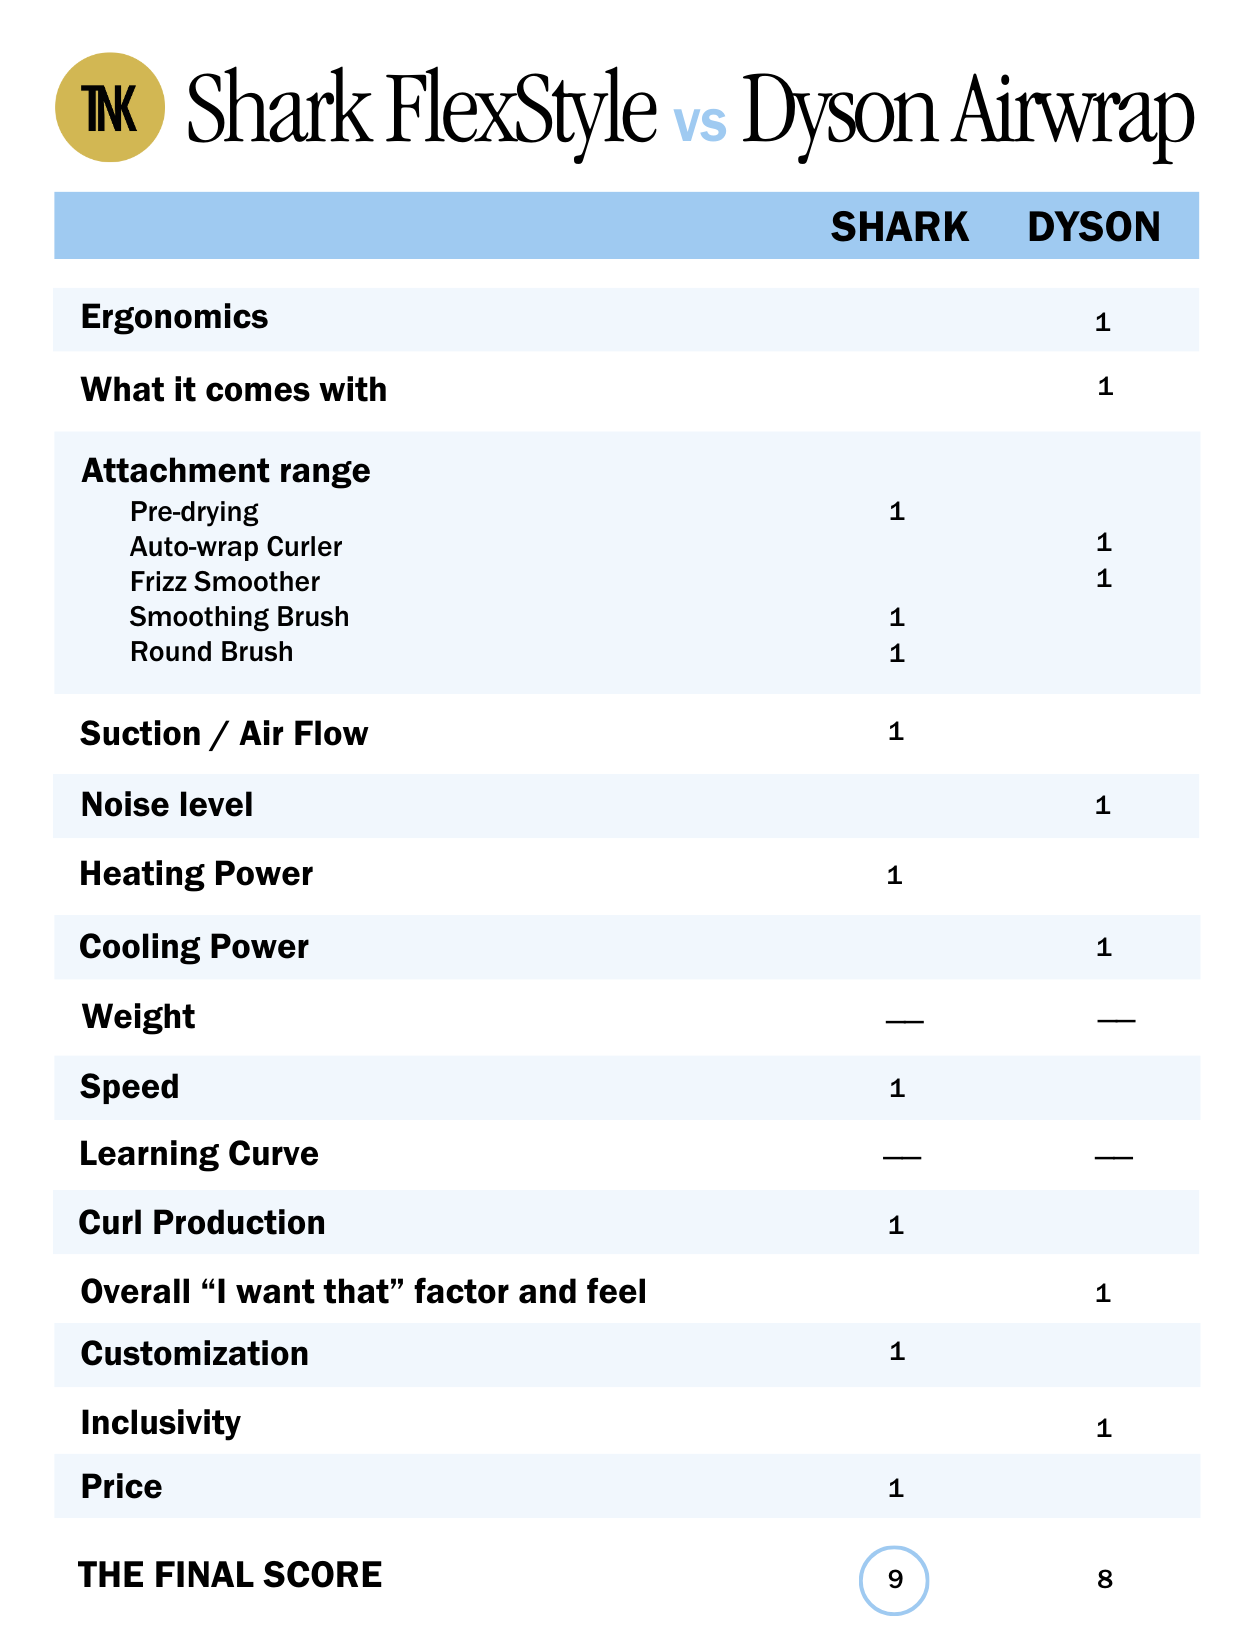 A graphic of Shark FlexStyle vs Dyson Airwrap with a tally of the final scores.